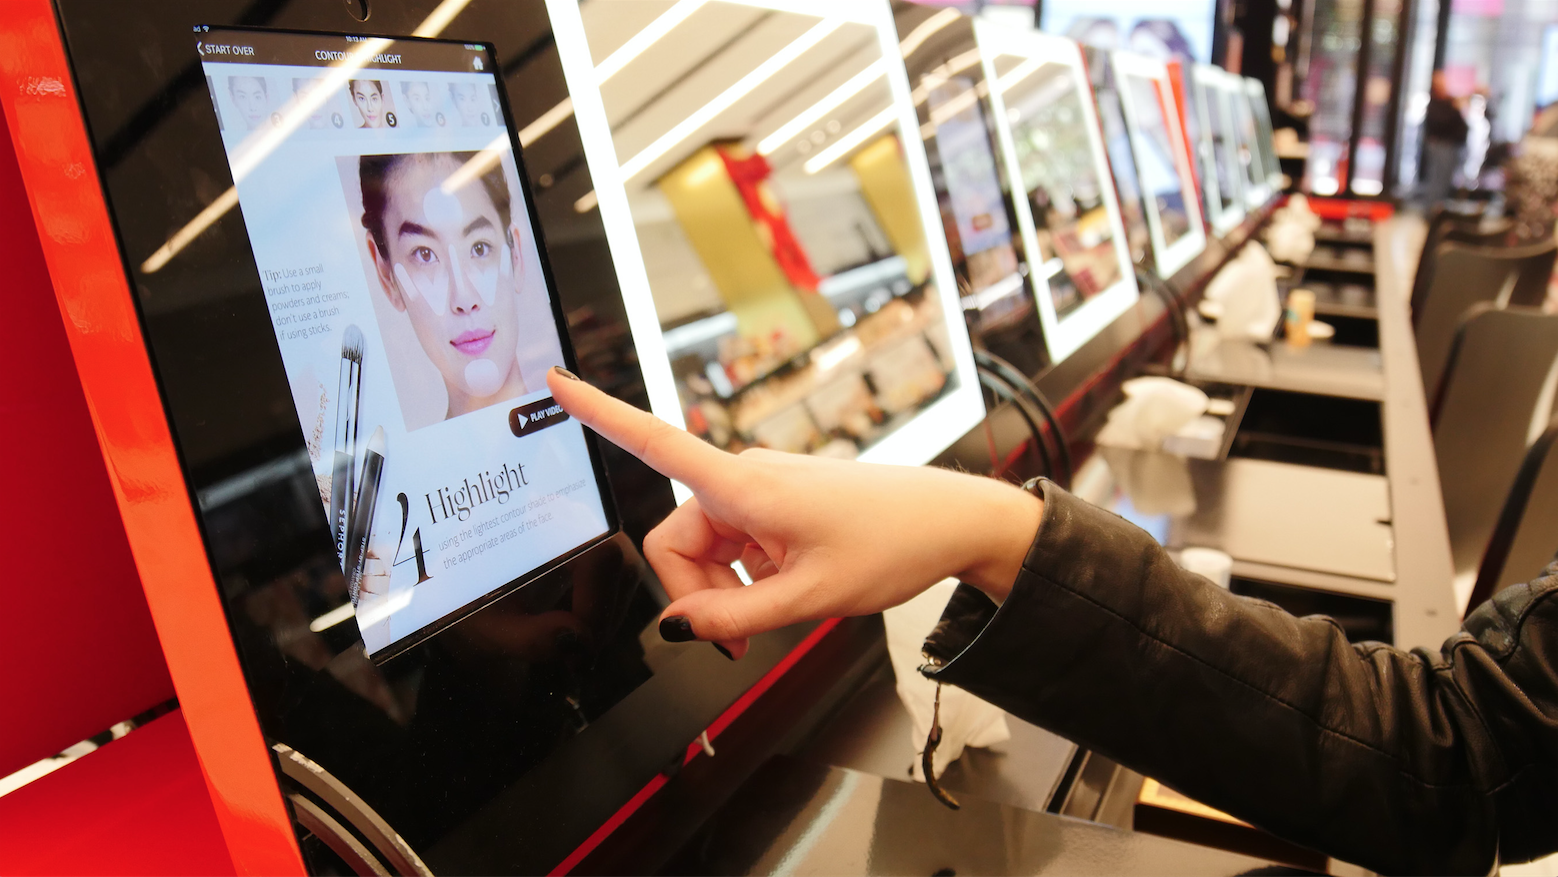 Consumers can view tutorials and gain beauty inspiration digitally